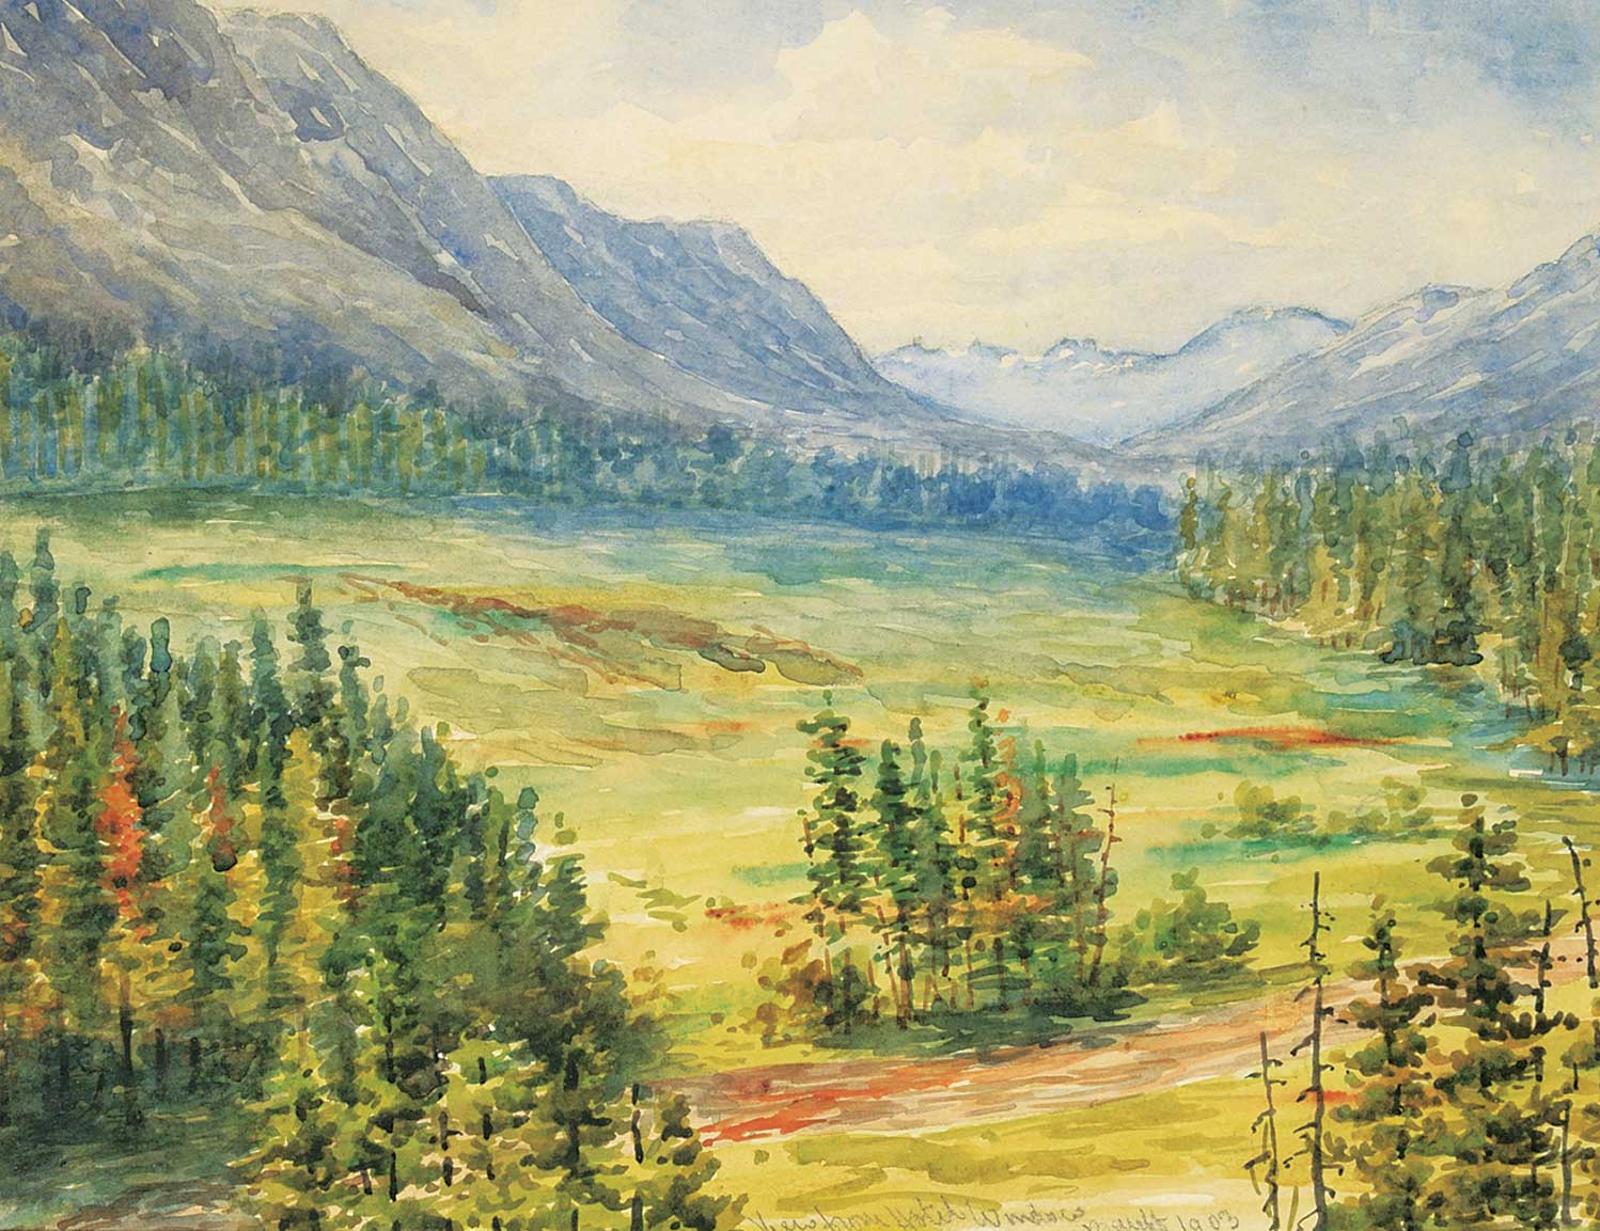 Walter Chesterton - View from Hotel Window, Banff